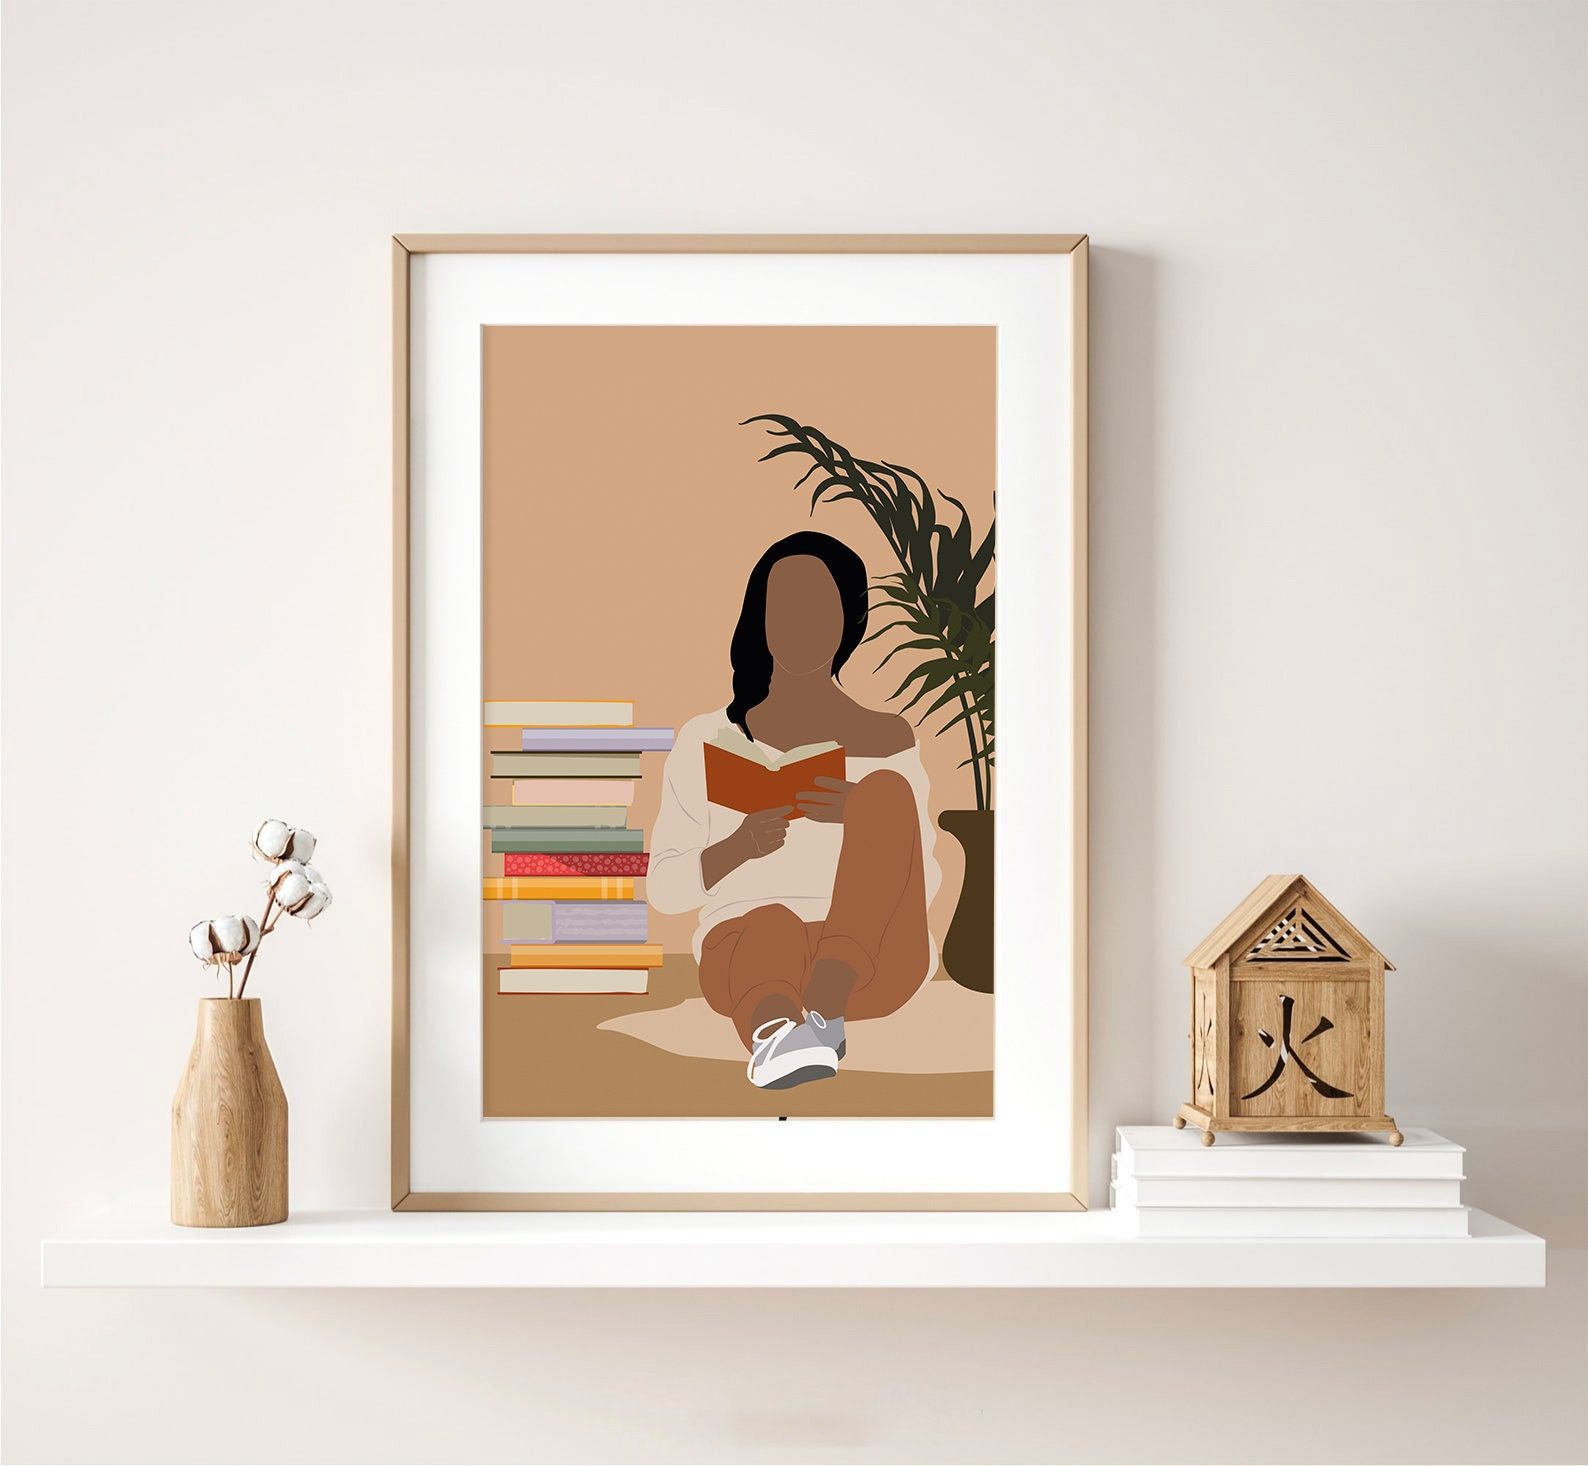 Image of a print featuring a Black woman wearing tennis shoes, a white sweatshirt, reading a book. She is sitting beside a pile of books. 